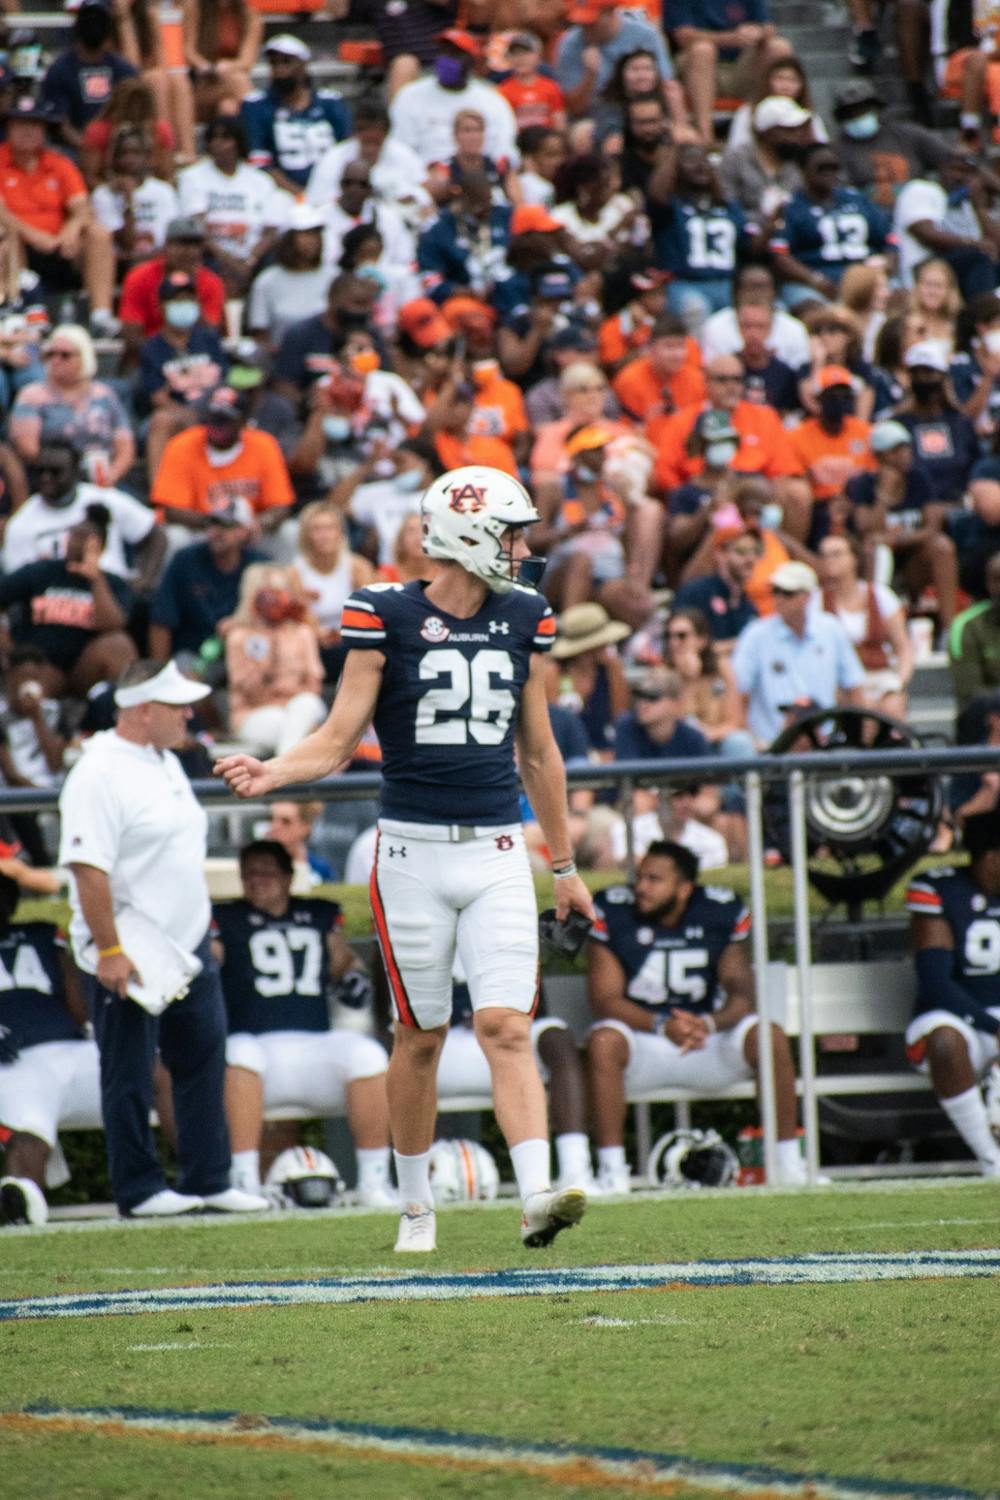 Anders Carlson moves up to second on all-time field goals in Auburn history